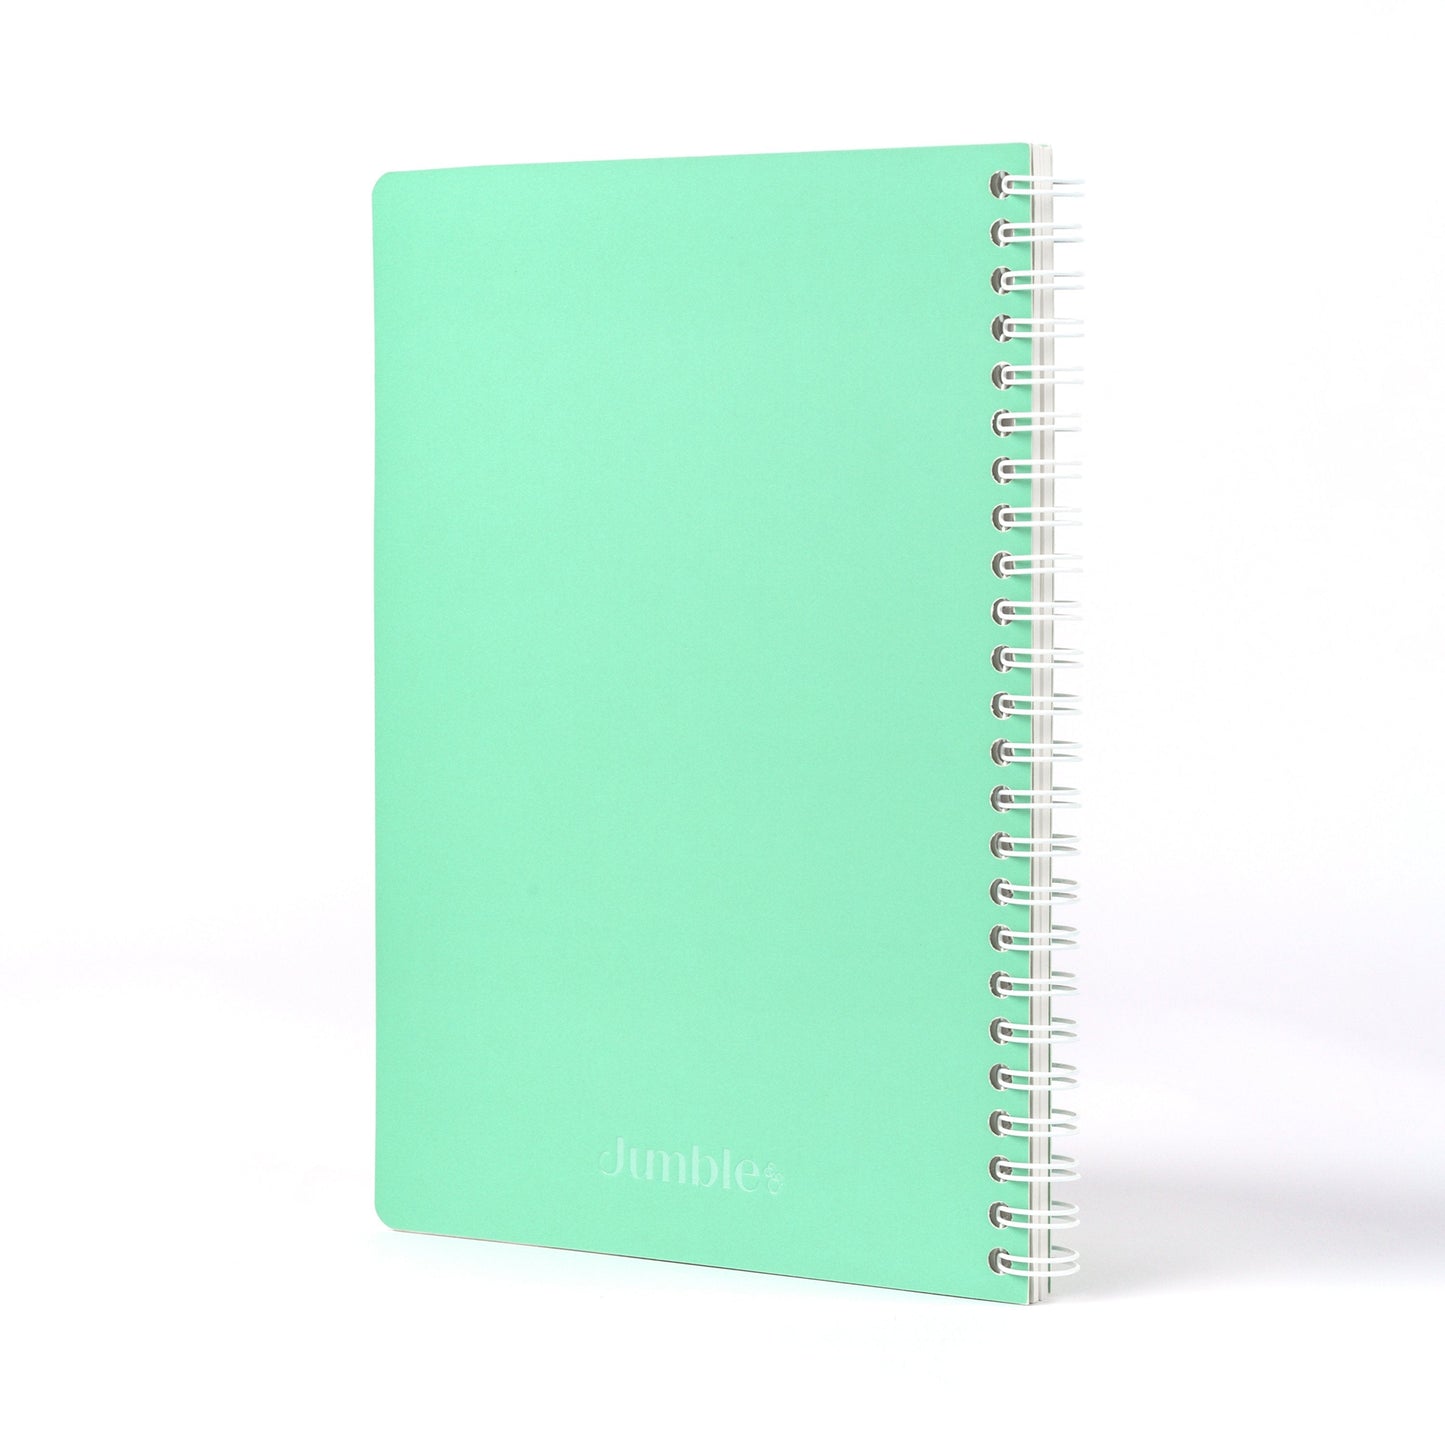 Convo Wiro Bound Ruled Notebook -Sour Grape Teal